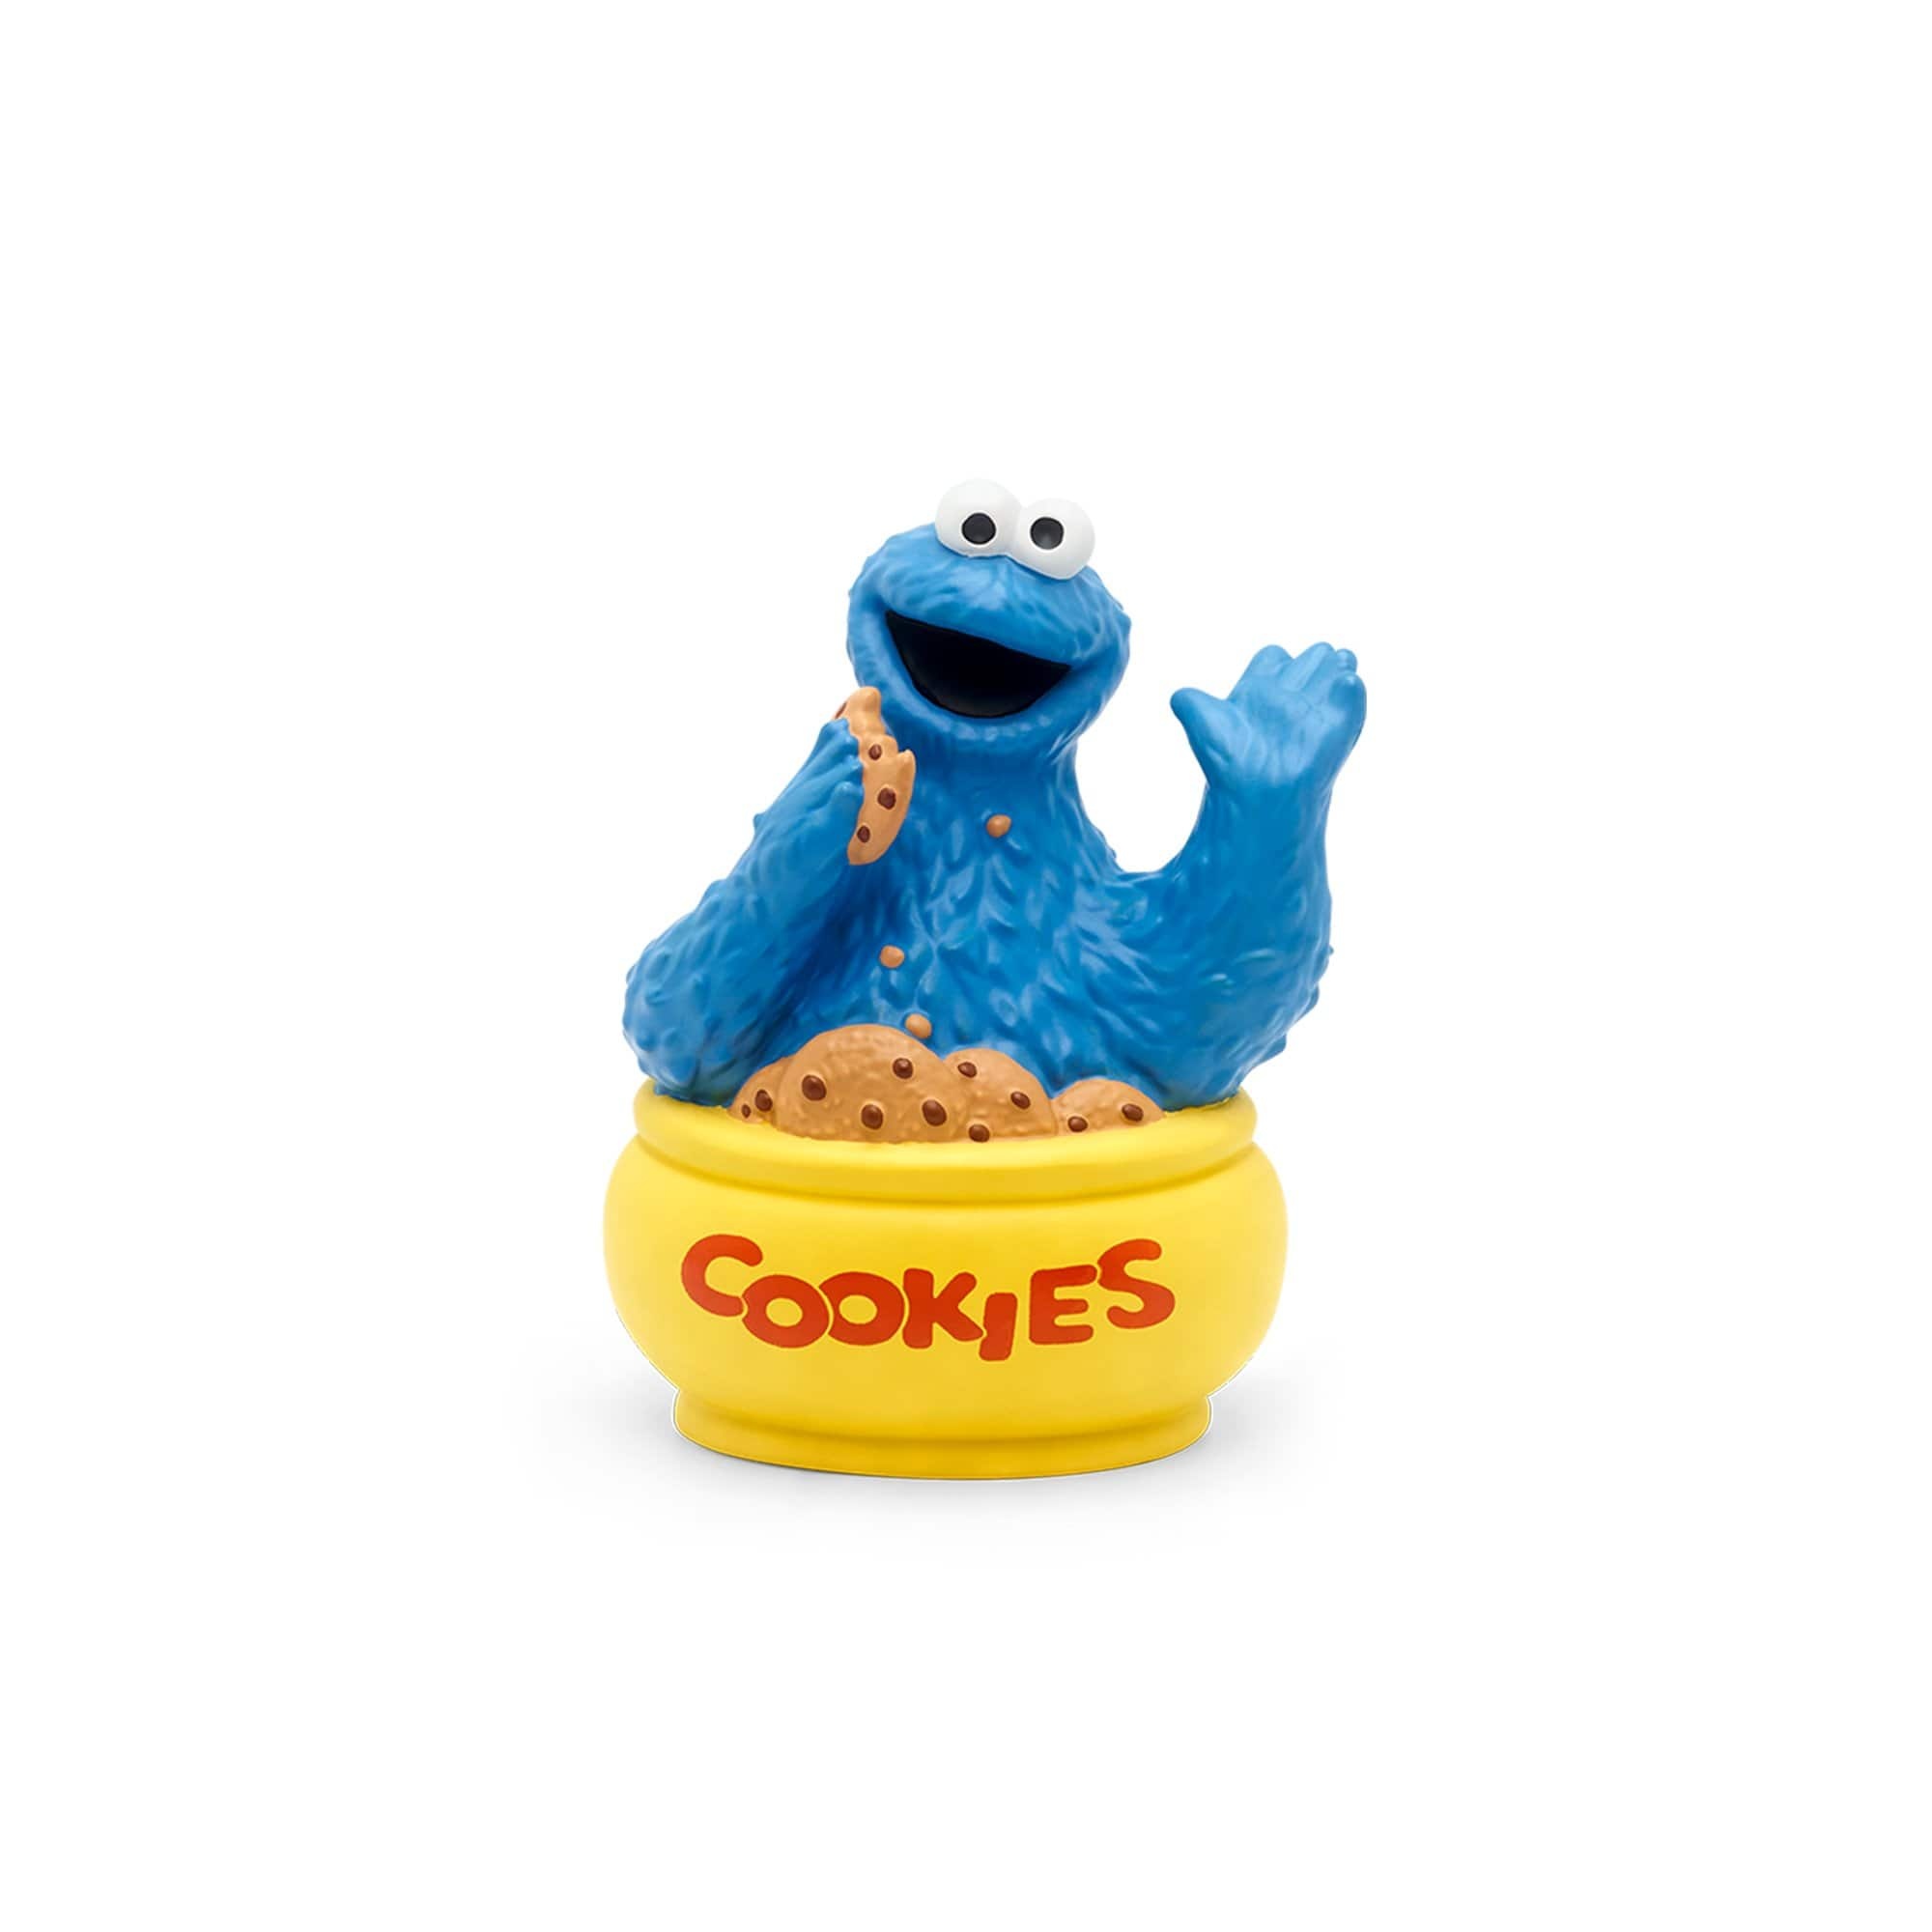 HD wallpaper, Fao Schwarz Collaboration, Sesame Street, Phone Hd Cookie Monster Sesame Street Background Photo, Collectible Item, Cookie Monster Tonie, 2000X2000 Hd Phone